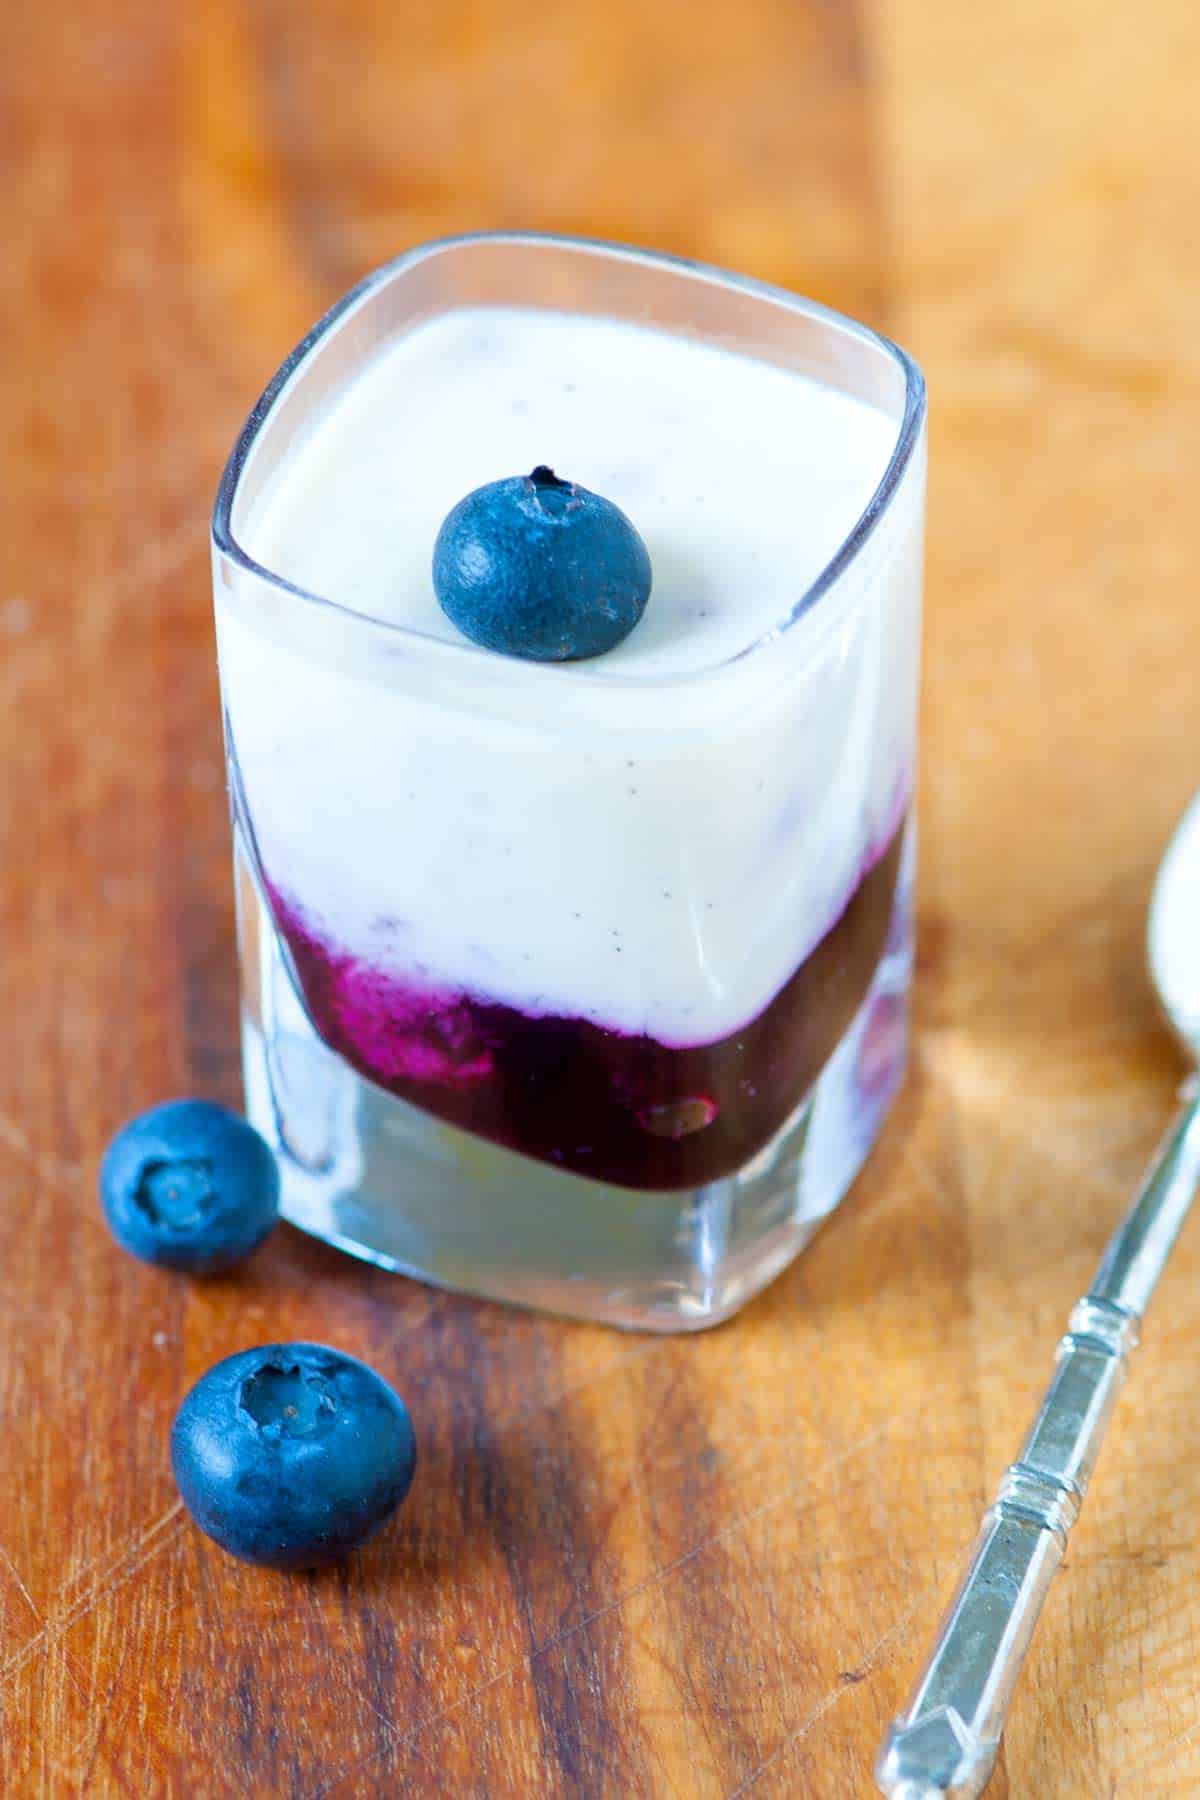 How to Make Panna Cotta with Blueberry Sauce